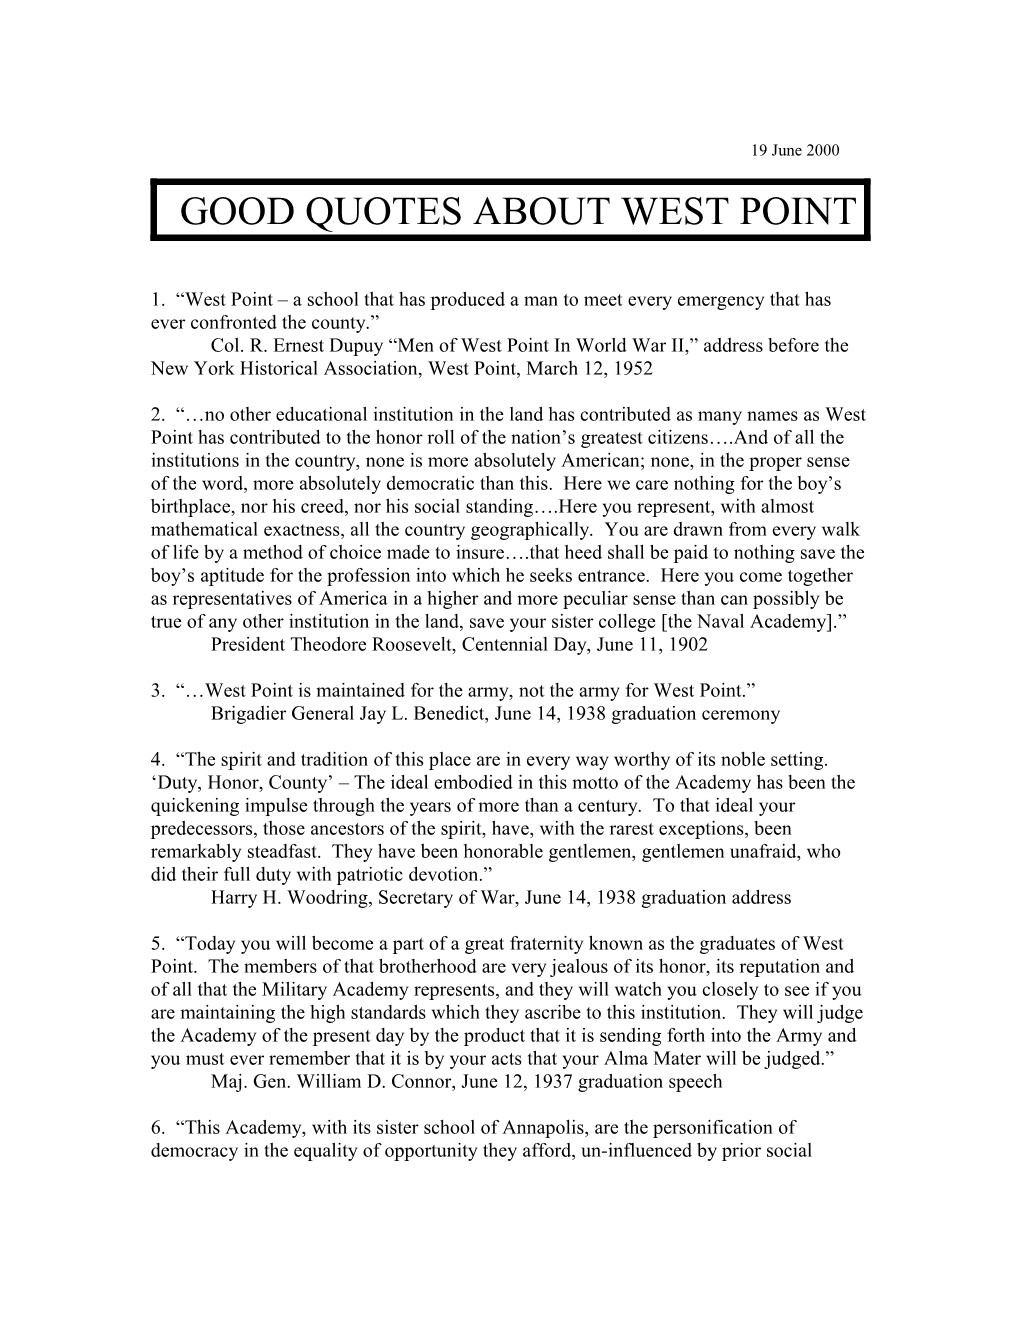 Good Quotes About West Point